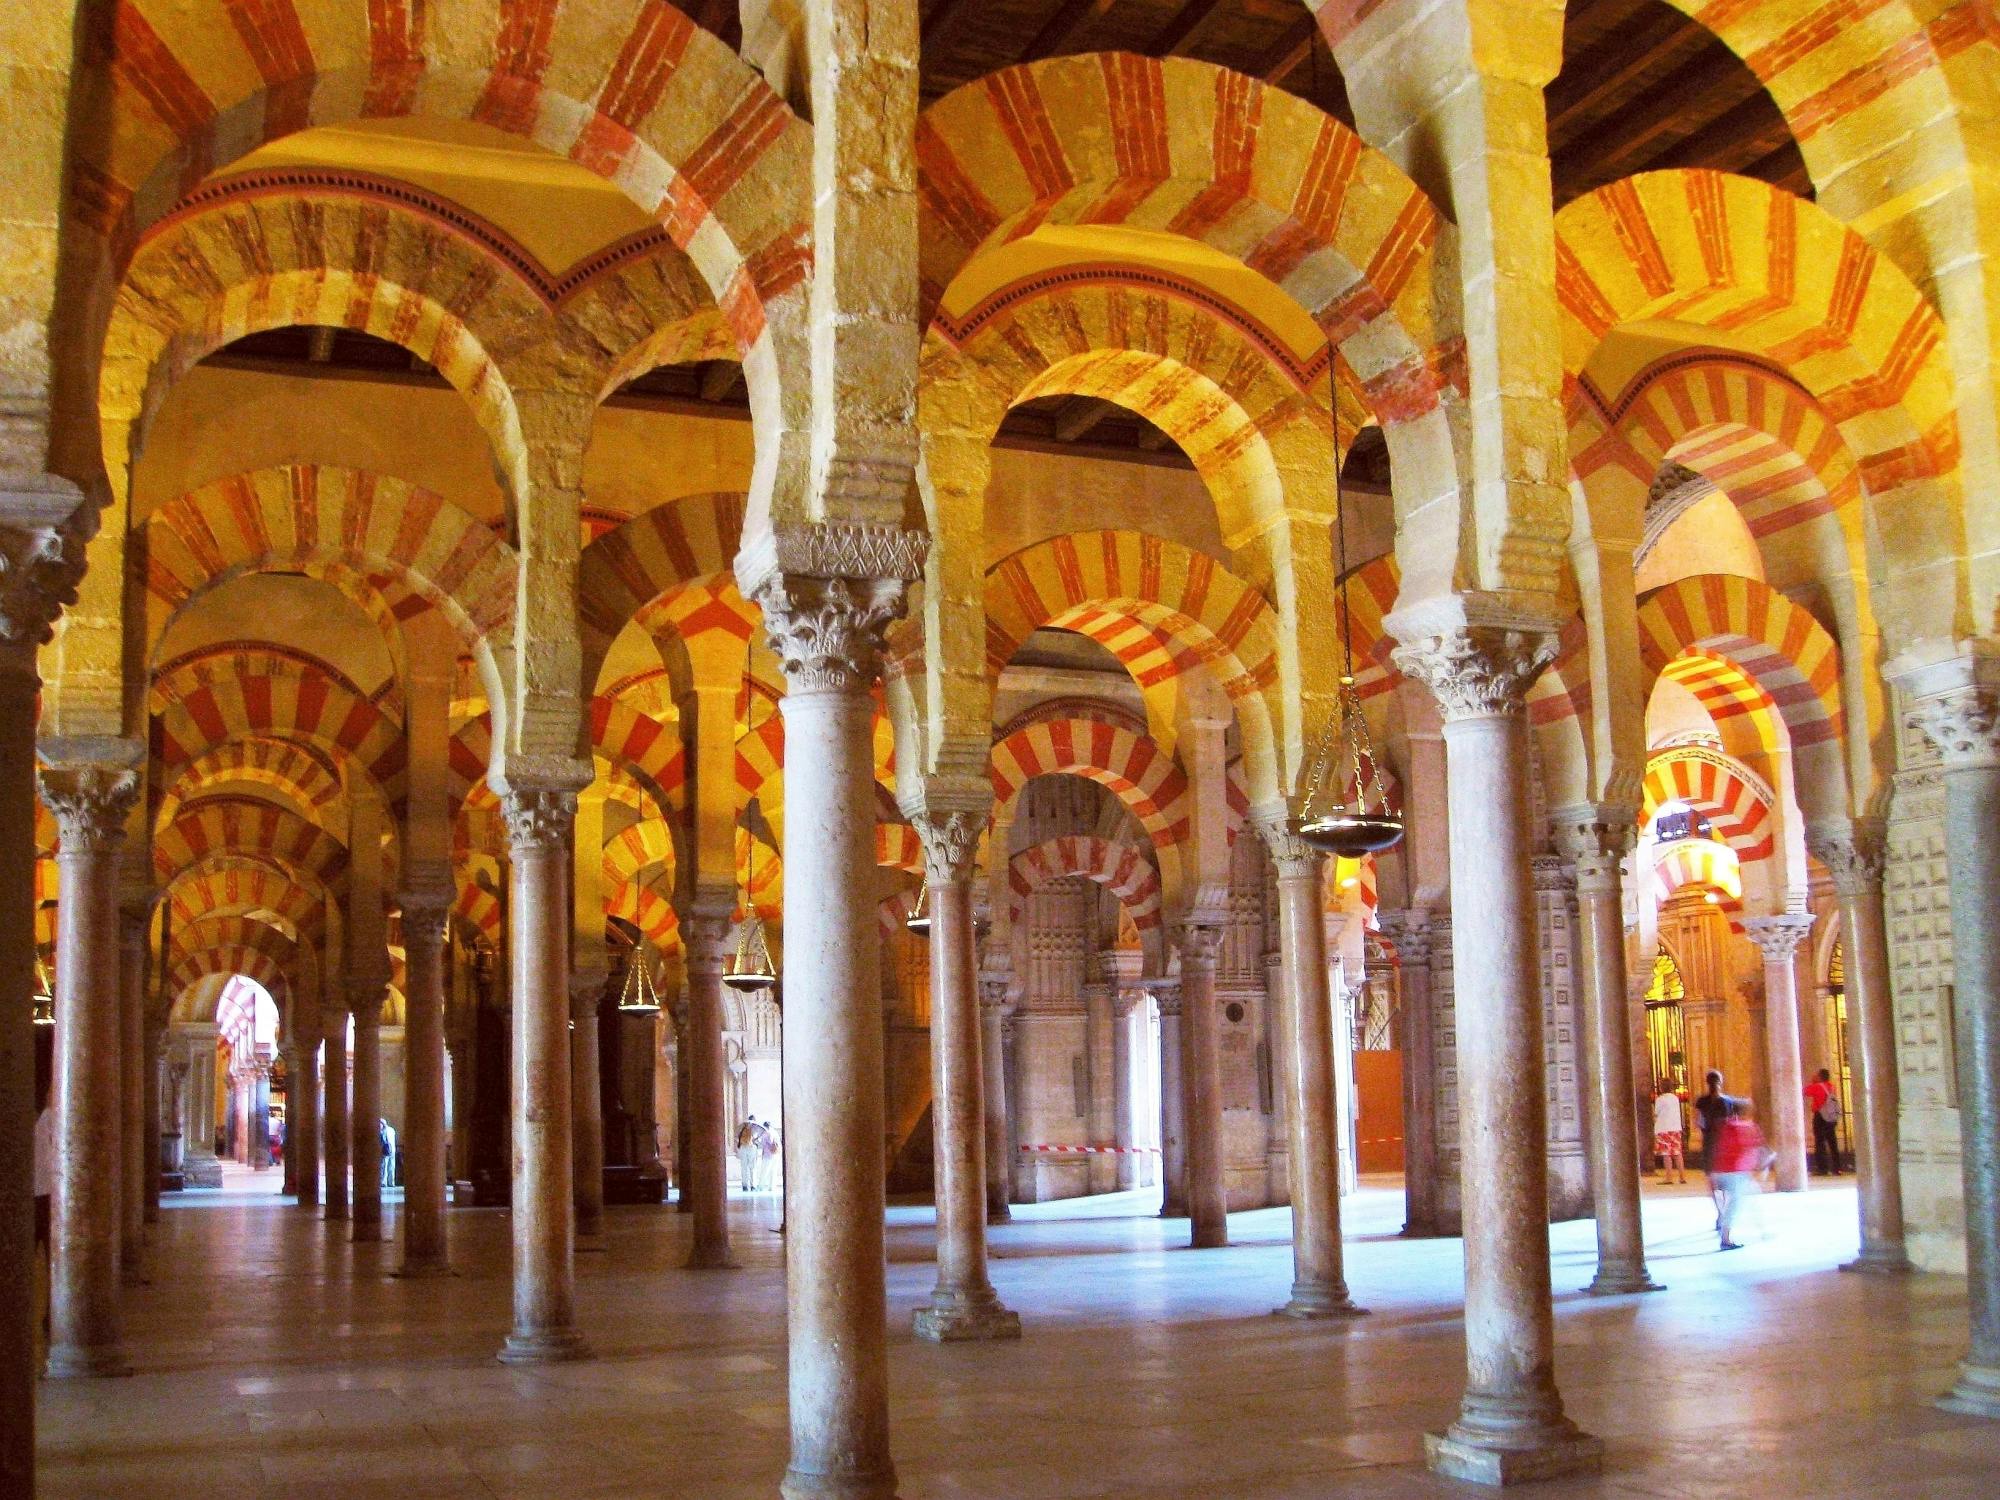 Cordoba Old Town Guided Tour including Mosque Visit